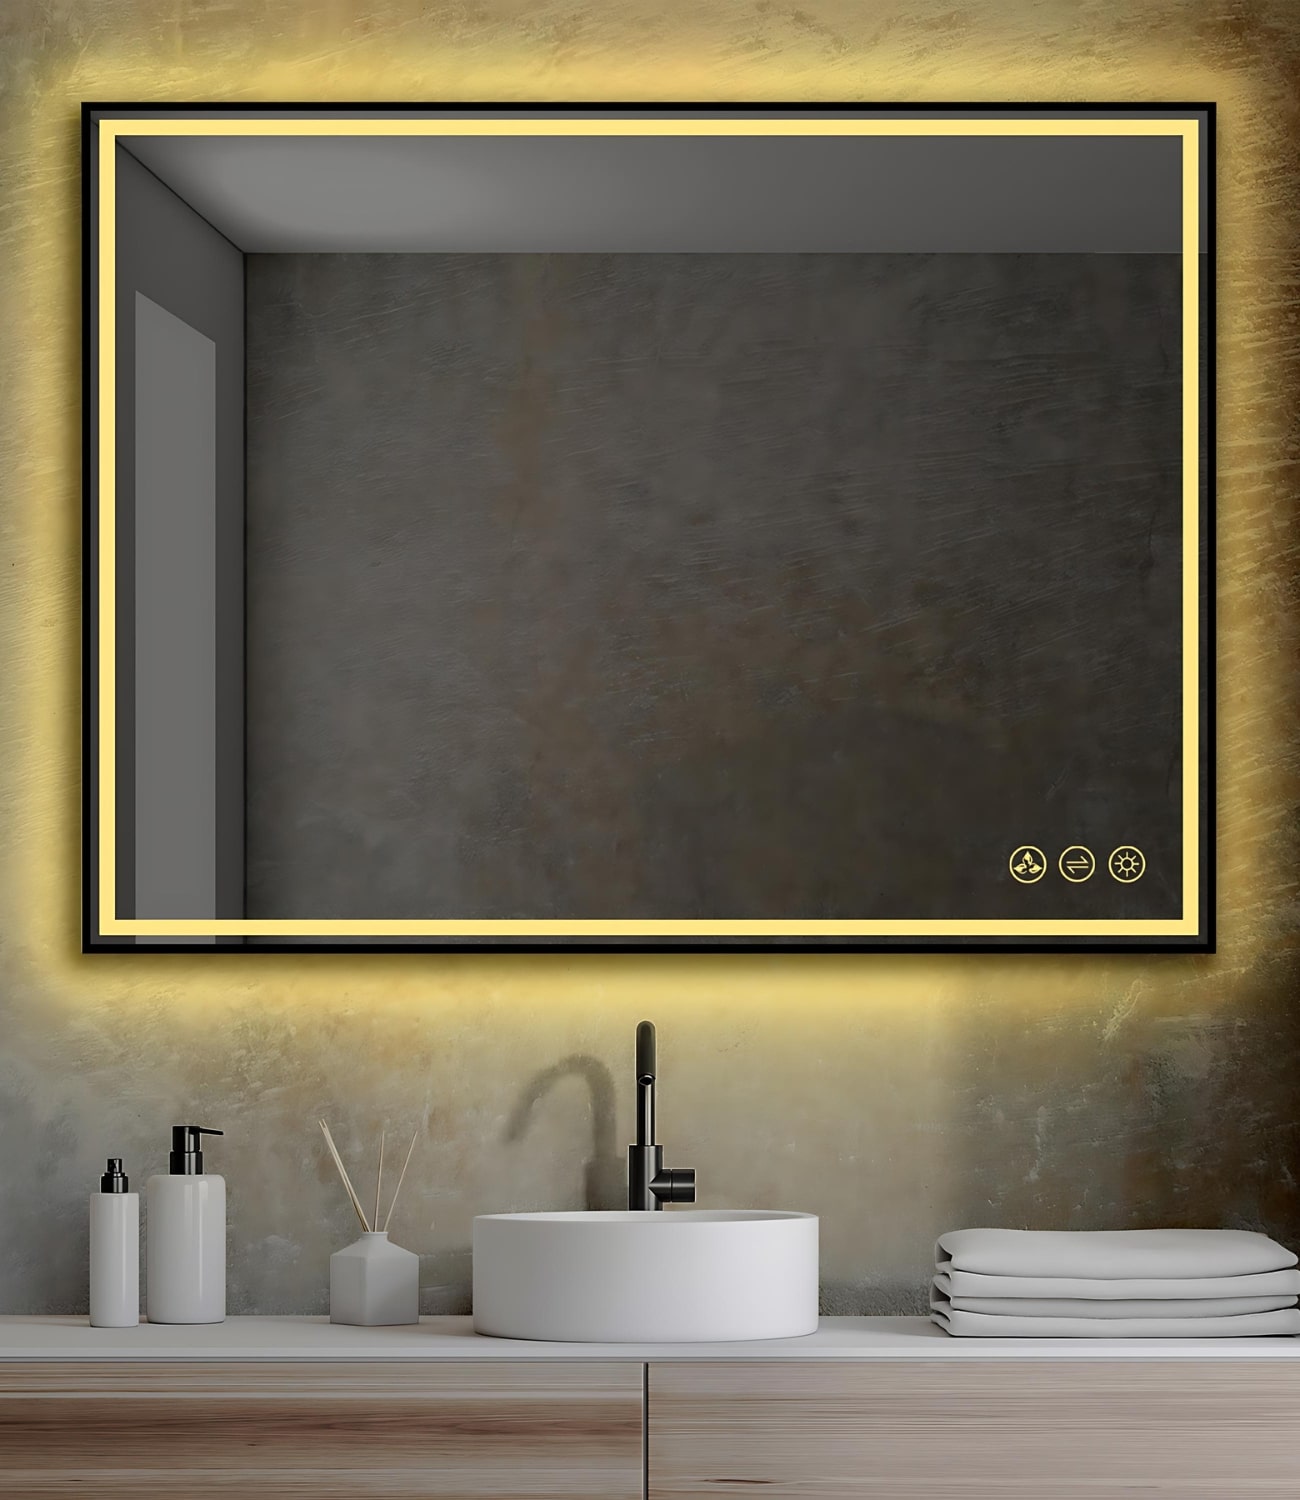 The Stellar LED Mirror is the High Quality, easy to install mirror for your next bathroom remodel